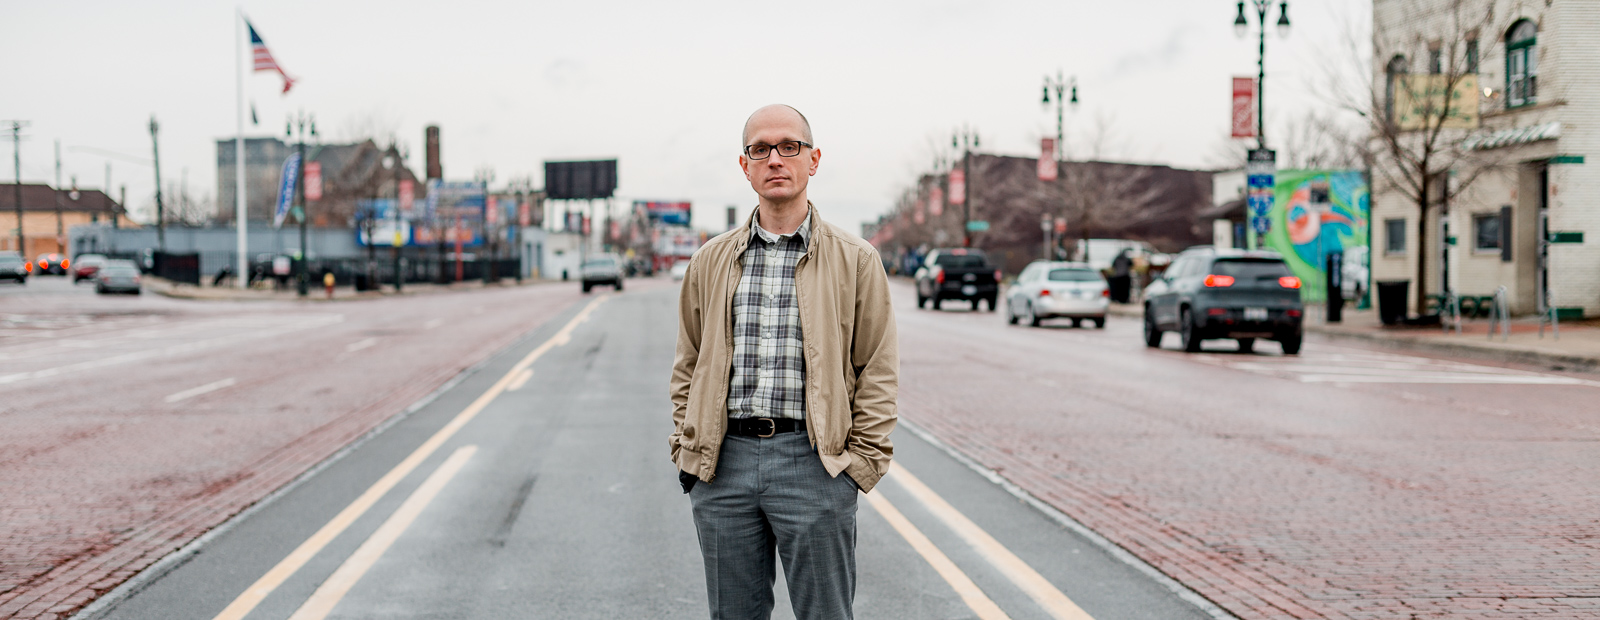 Historian Paul Szewczyk, who runs the blog Detroit Urbanism, in the middle of Michigan Avenue.